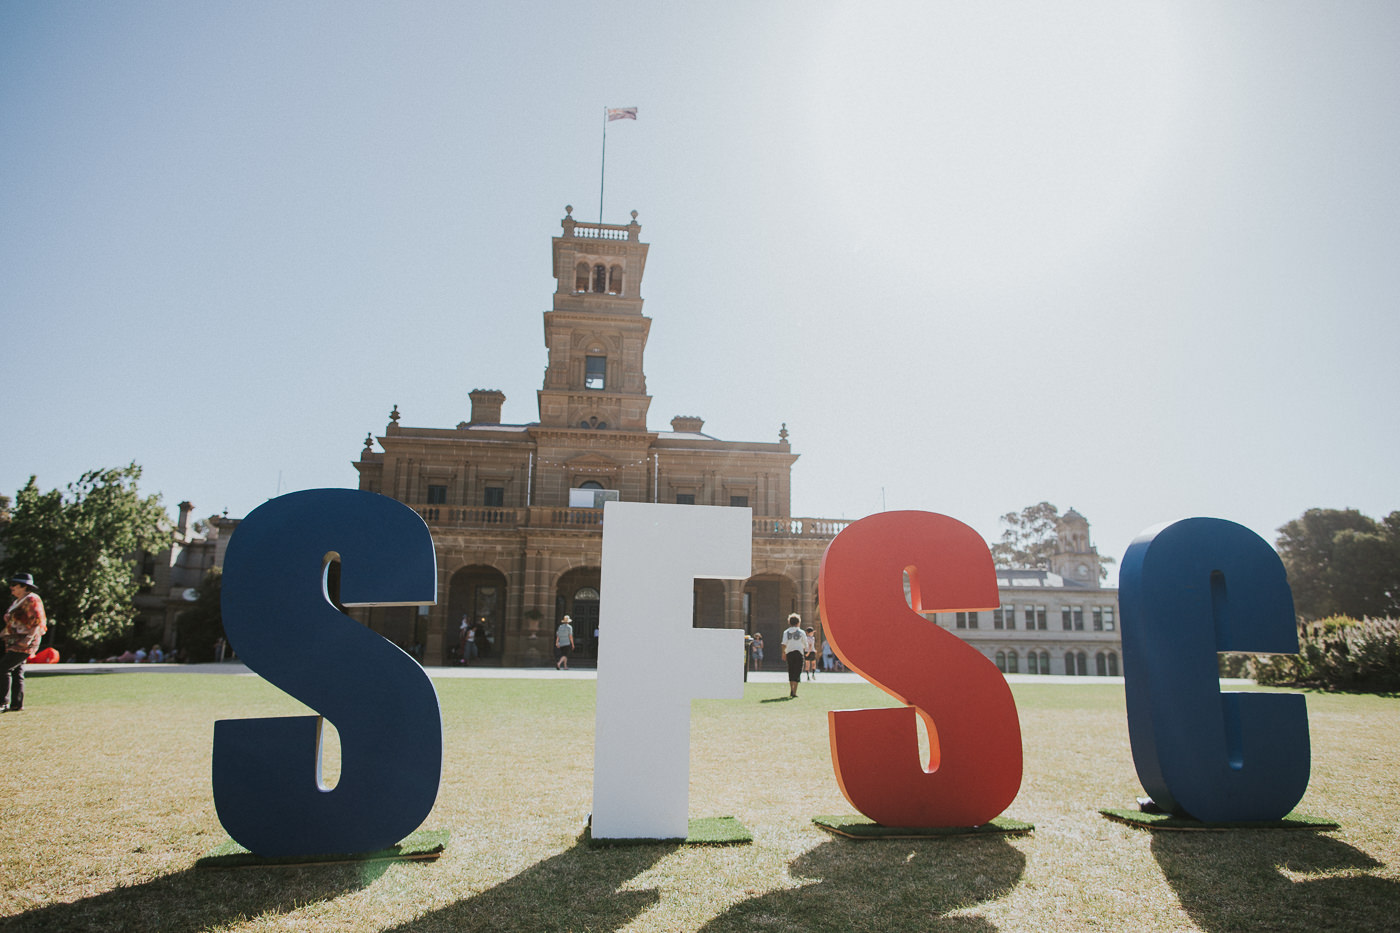 sfsc - so frenchy so chic at werribee mansion